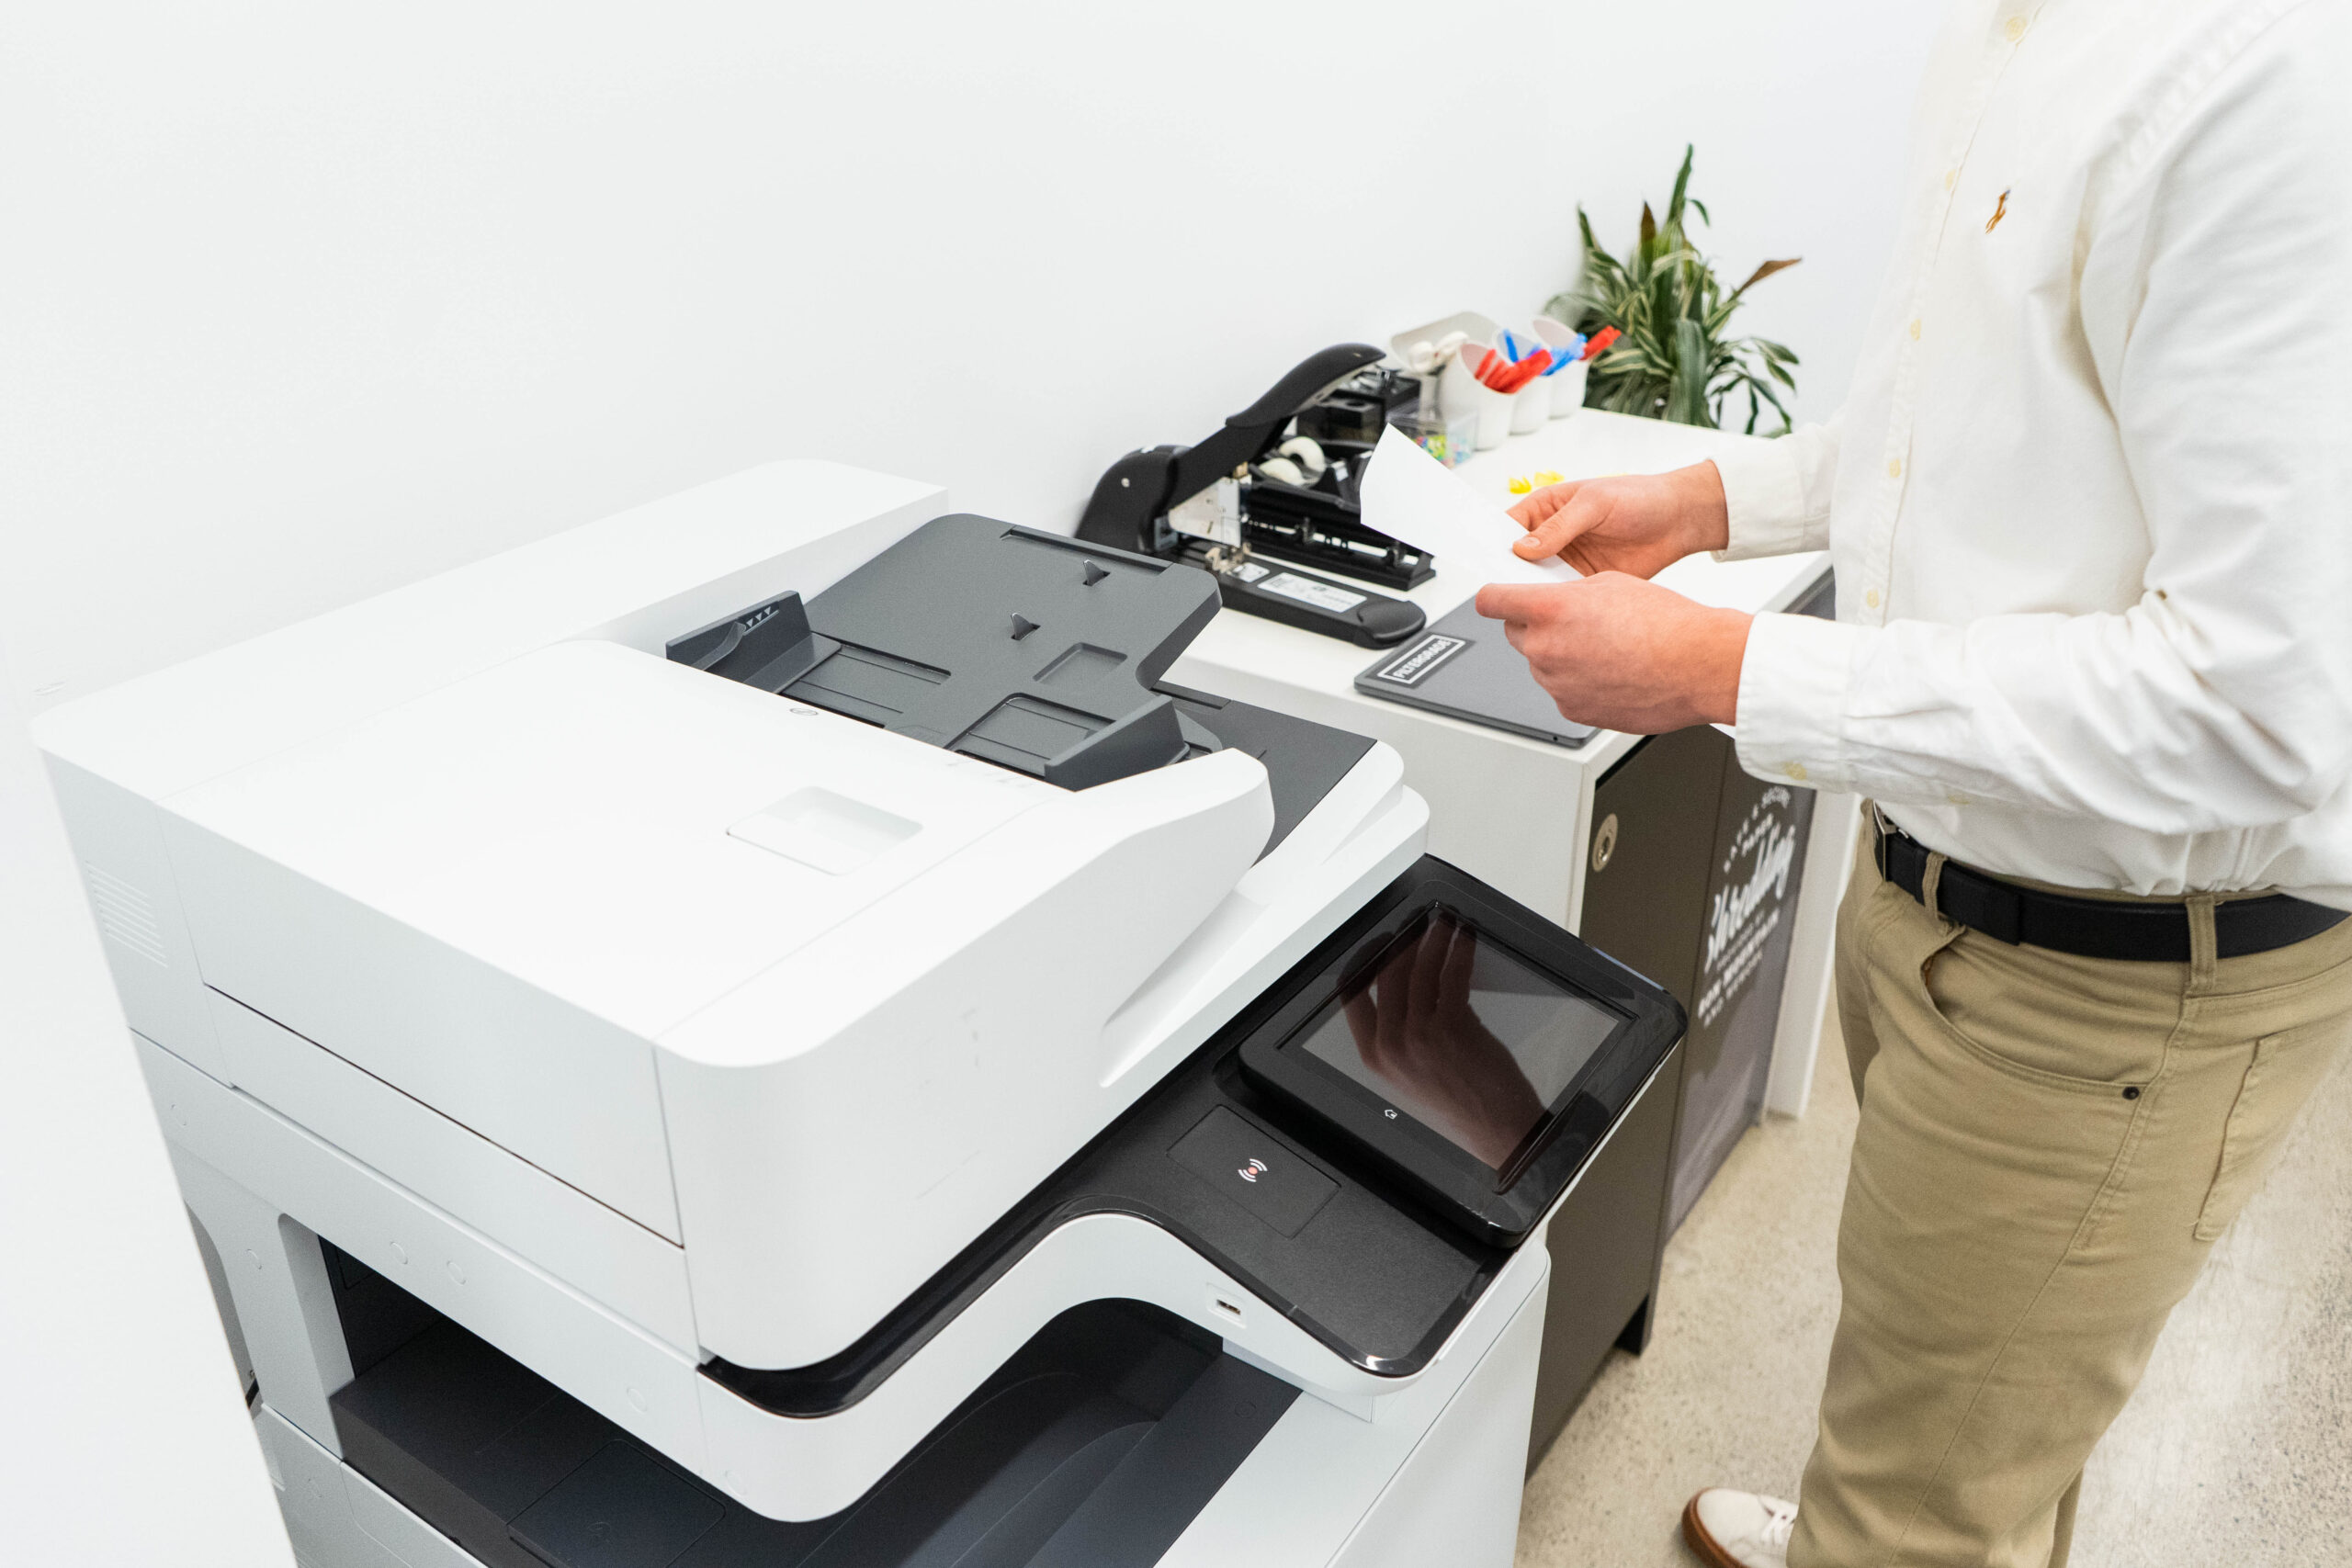 What Every Small Business Should Know About Leasing a Copier